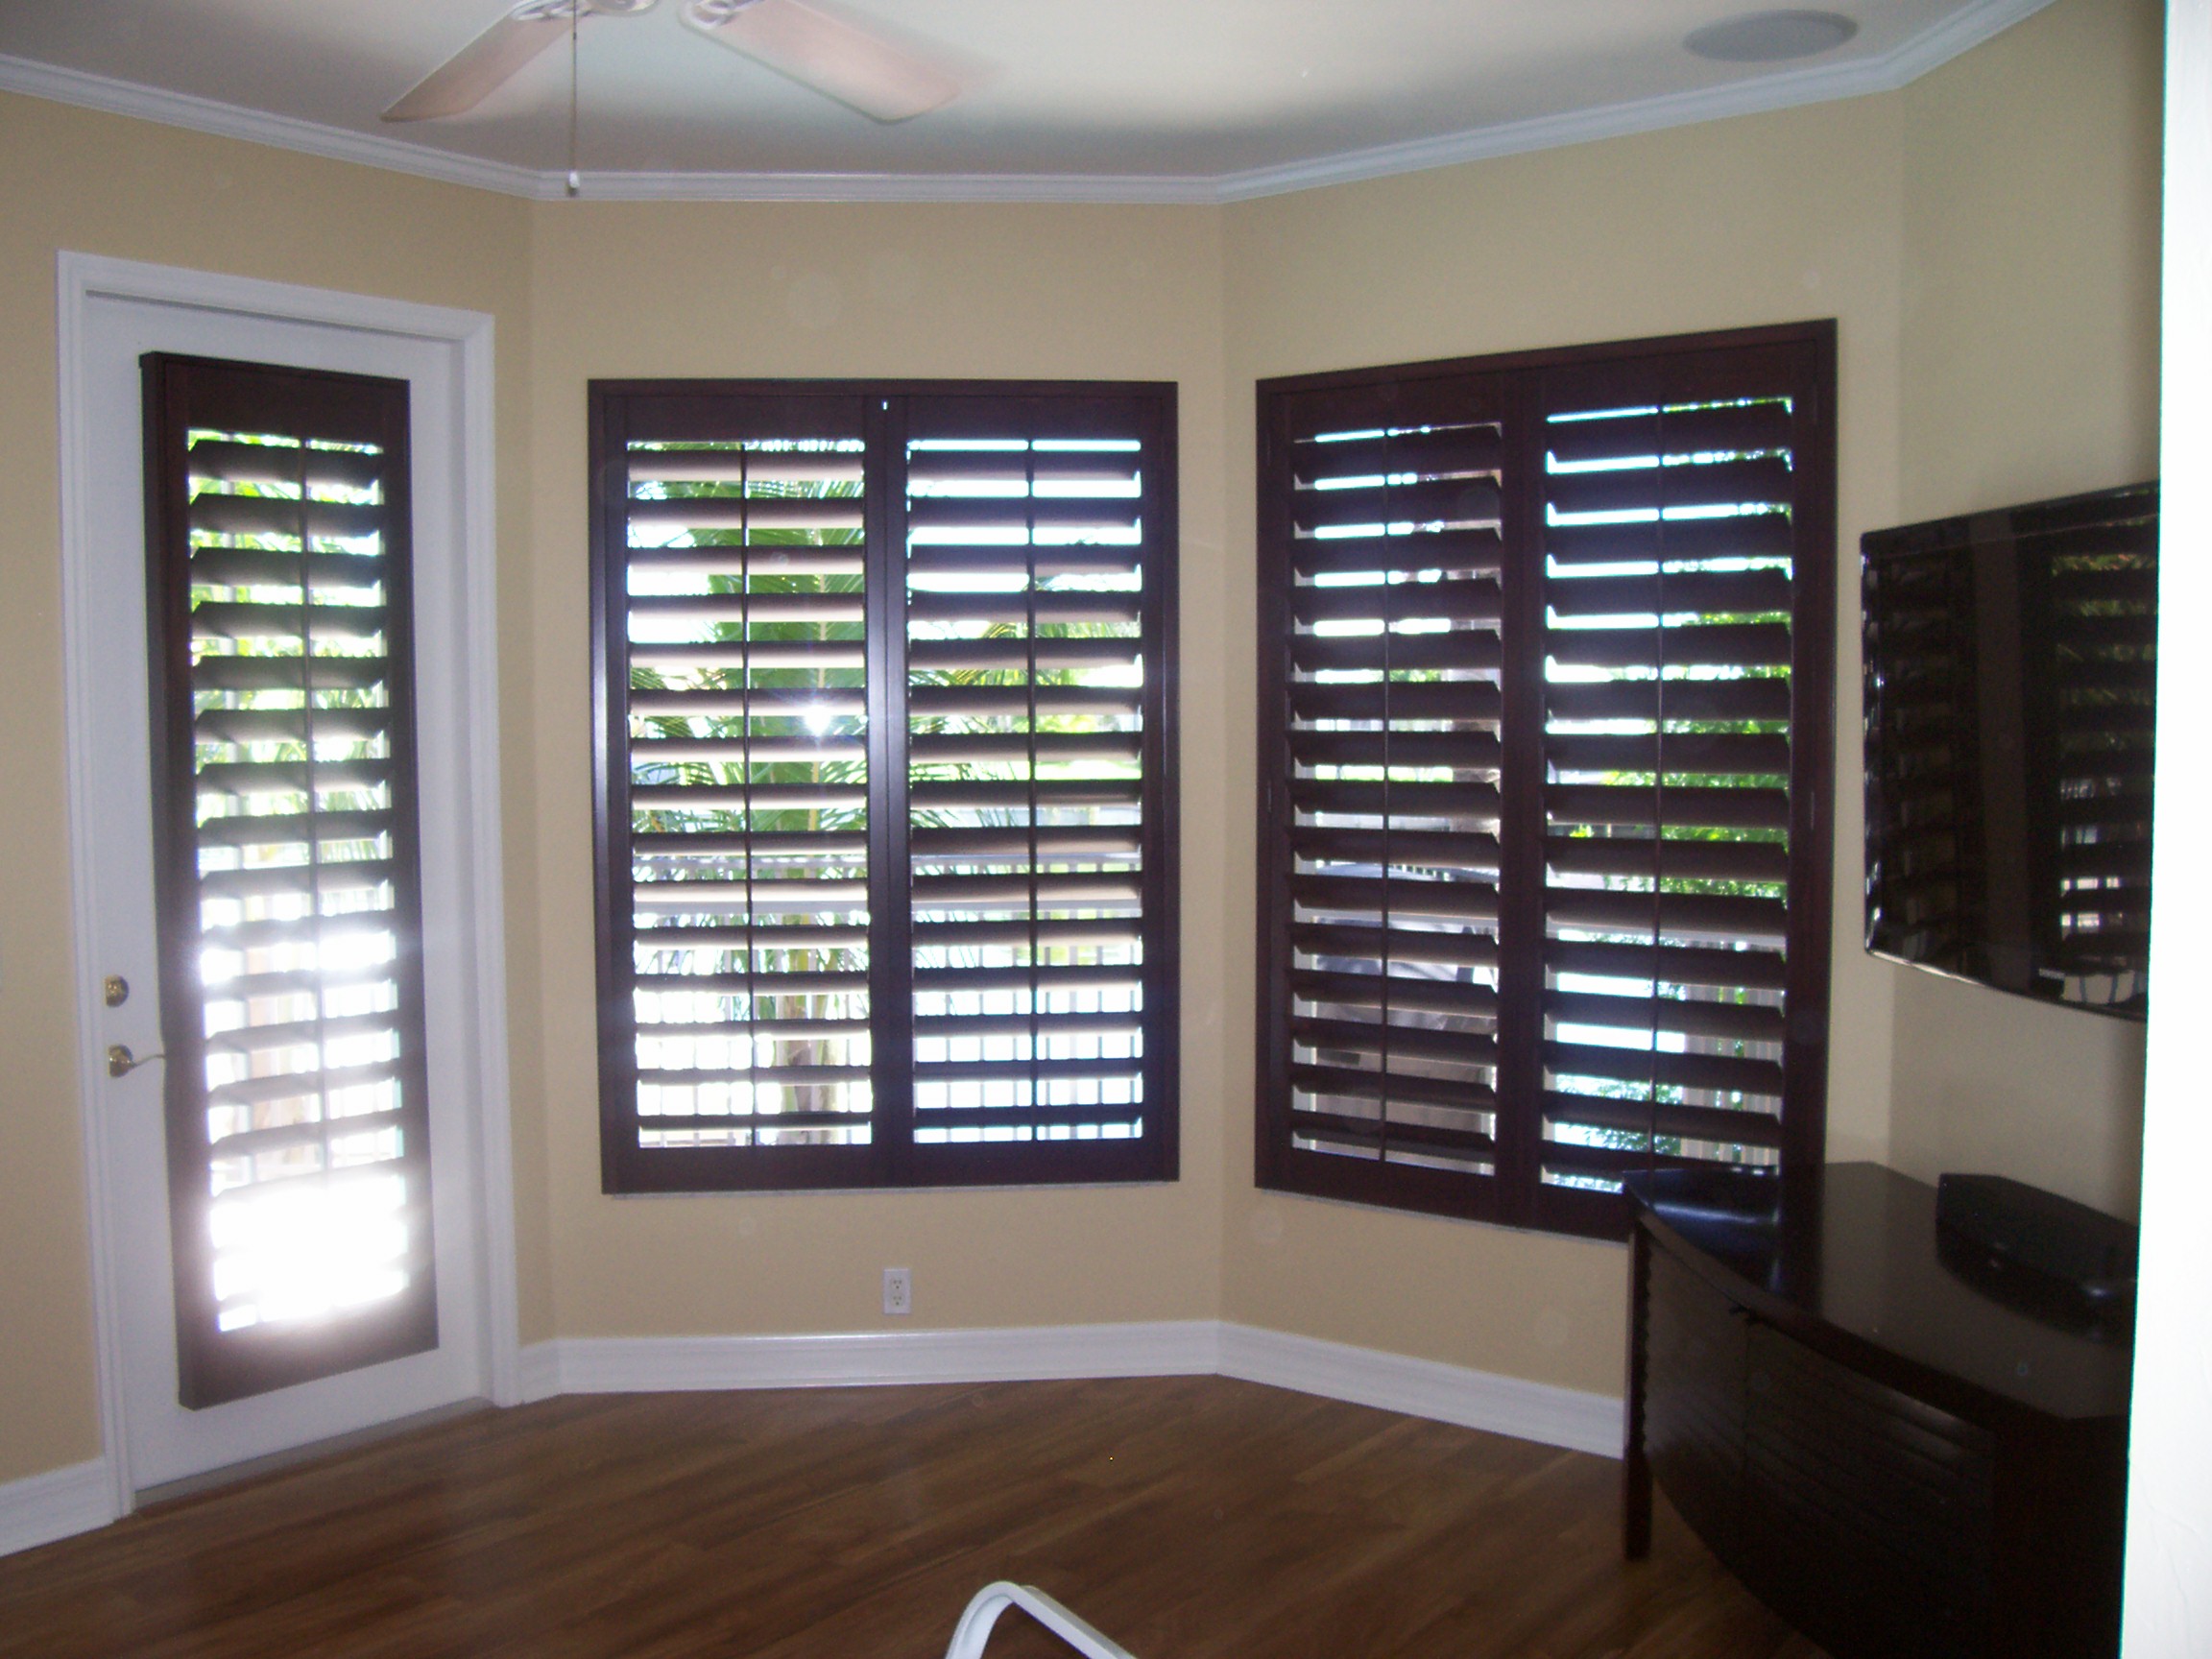 Picture 15 of 22 - Wood Window Shutters Inspirational 5bc7071fb02f 1 ...